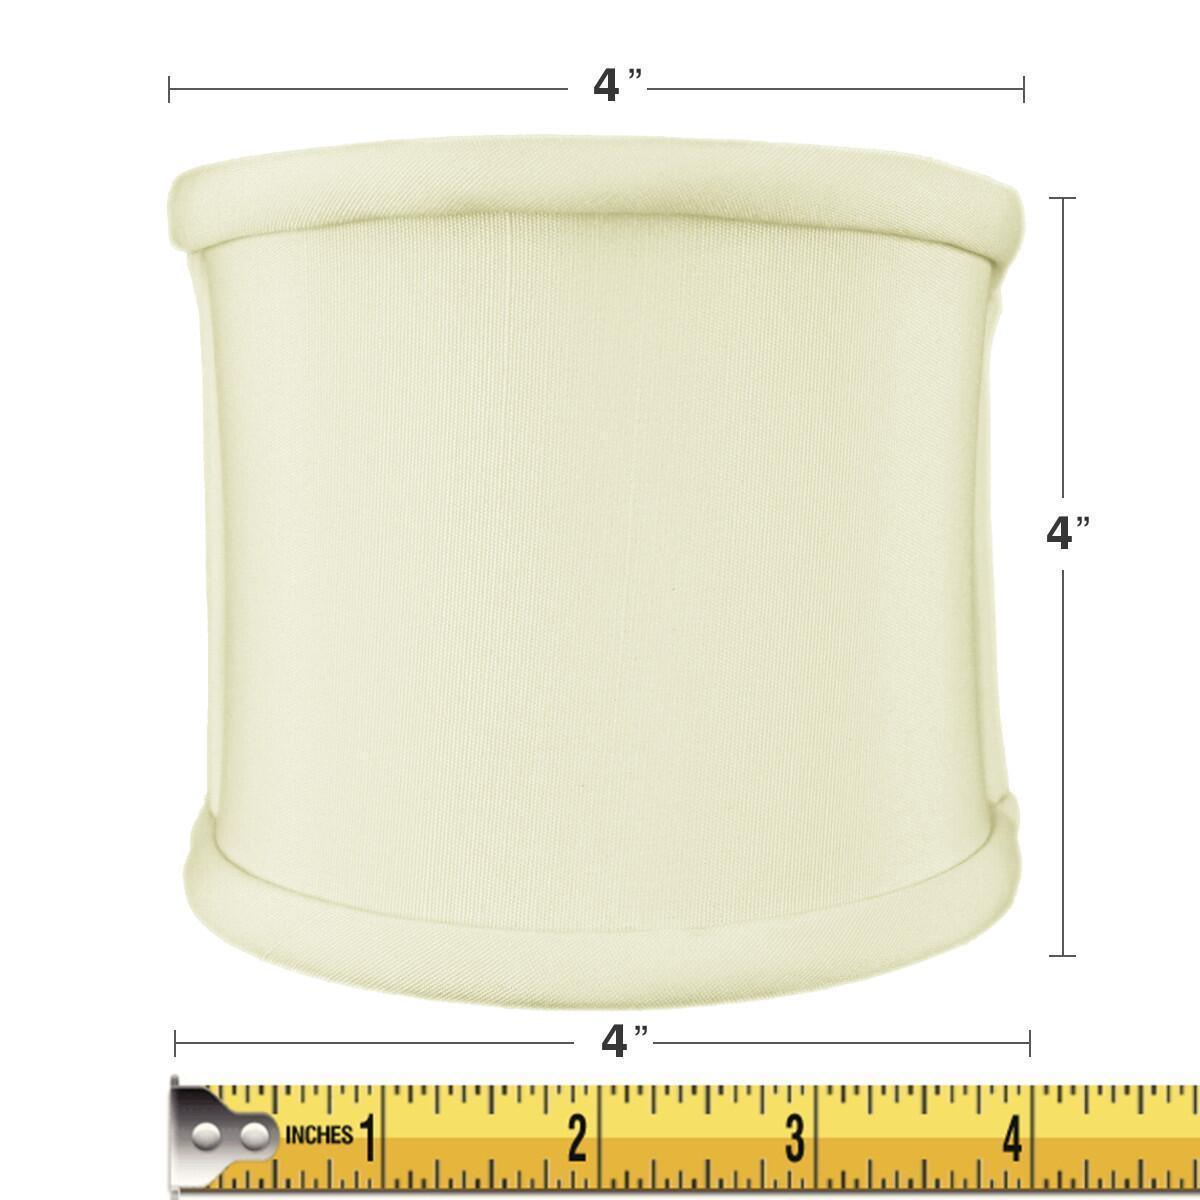 Clip-on Sconce Half-Shell Eggshell Shantung Lampshade - Specialty Shades